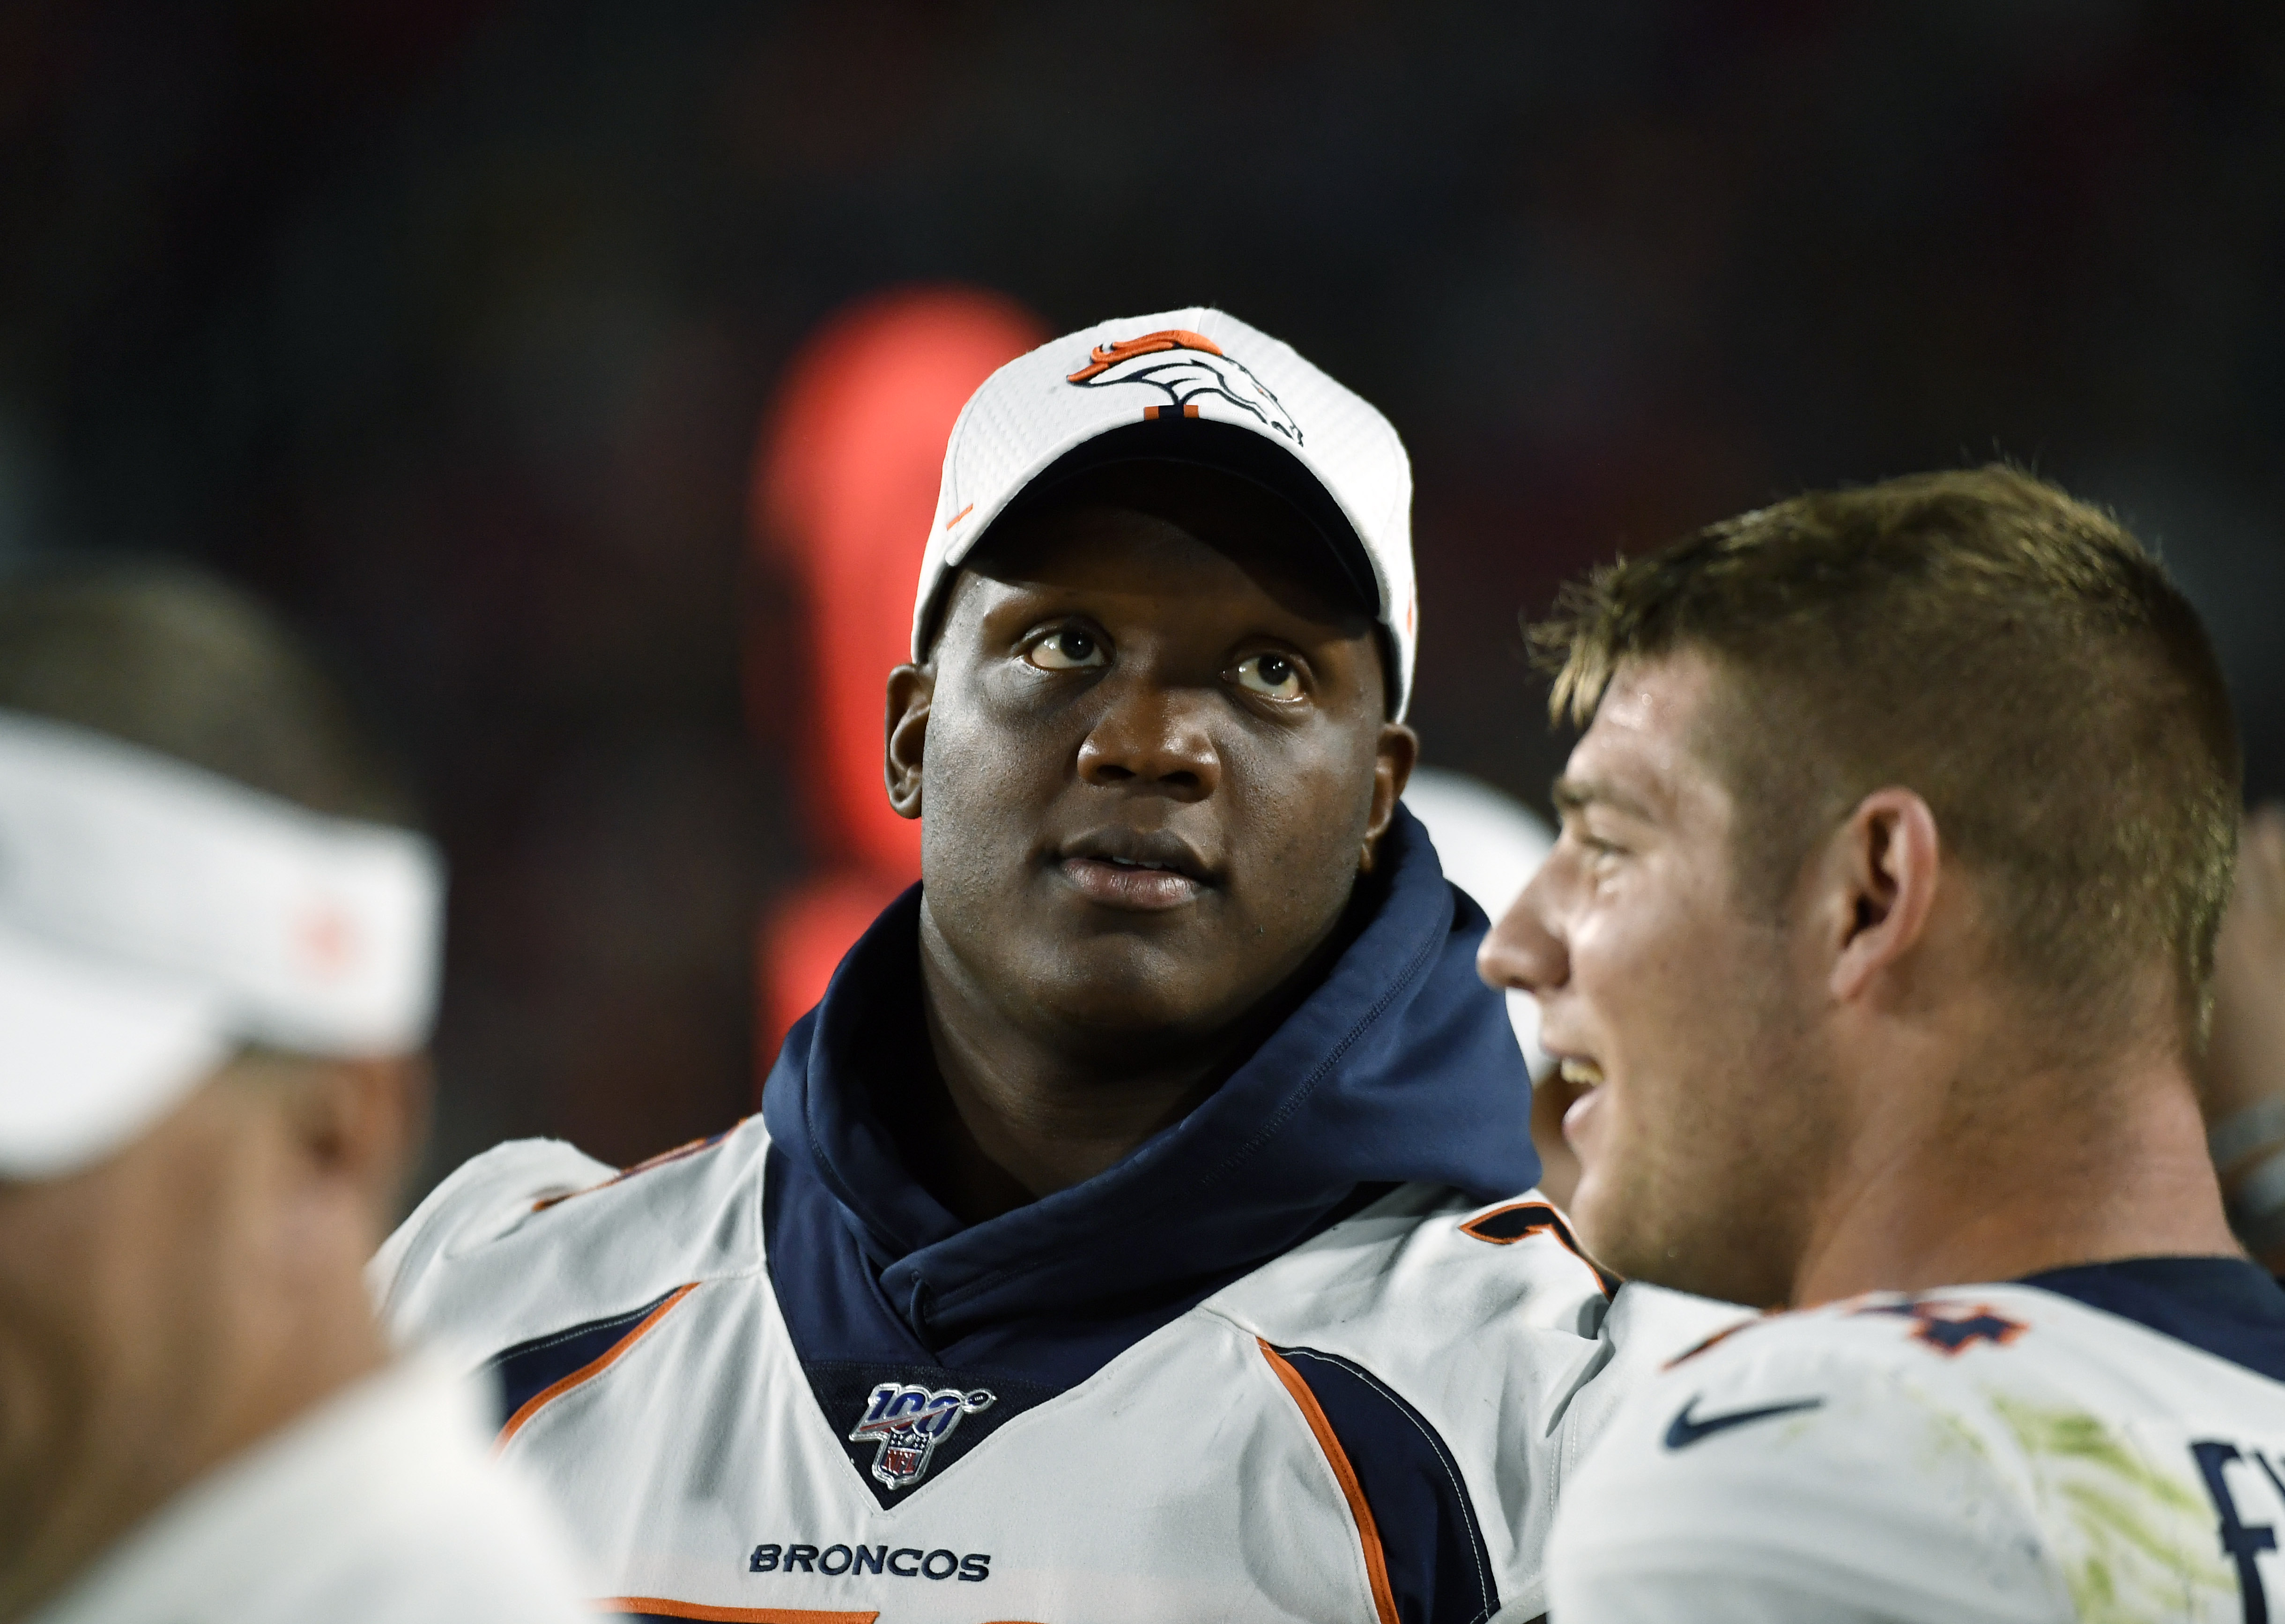 Working Out on His Own Just Cost the Denver Broncos' Ja'Wuan James